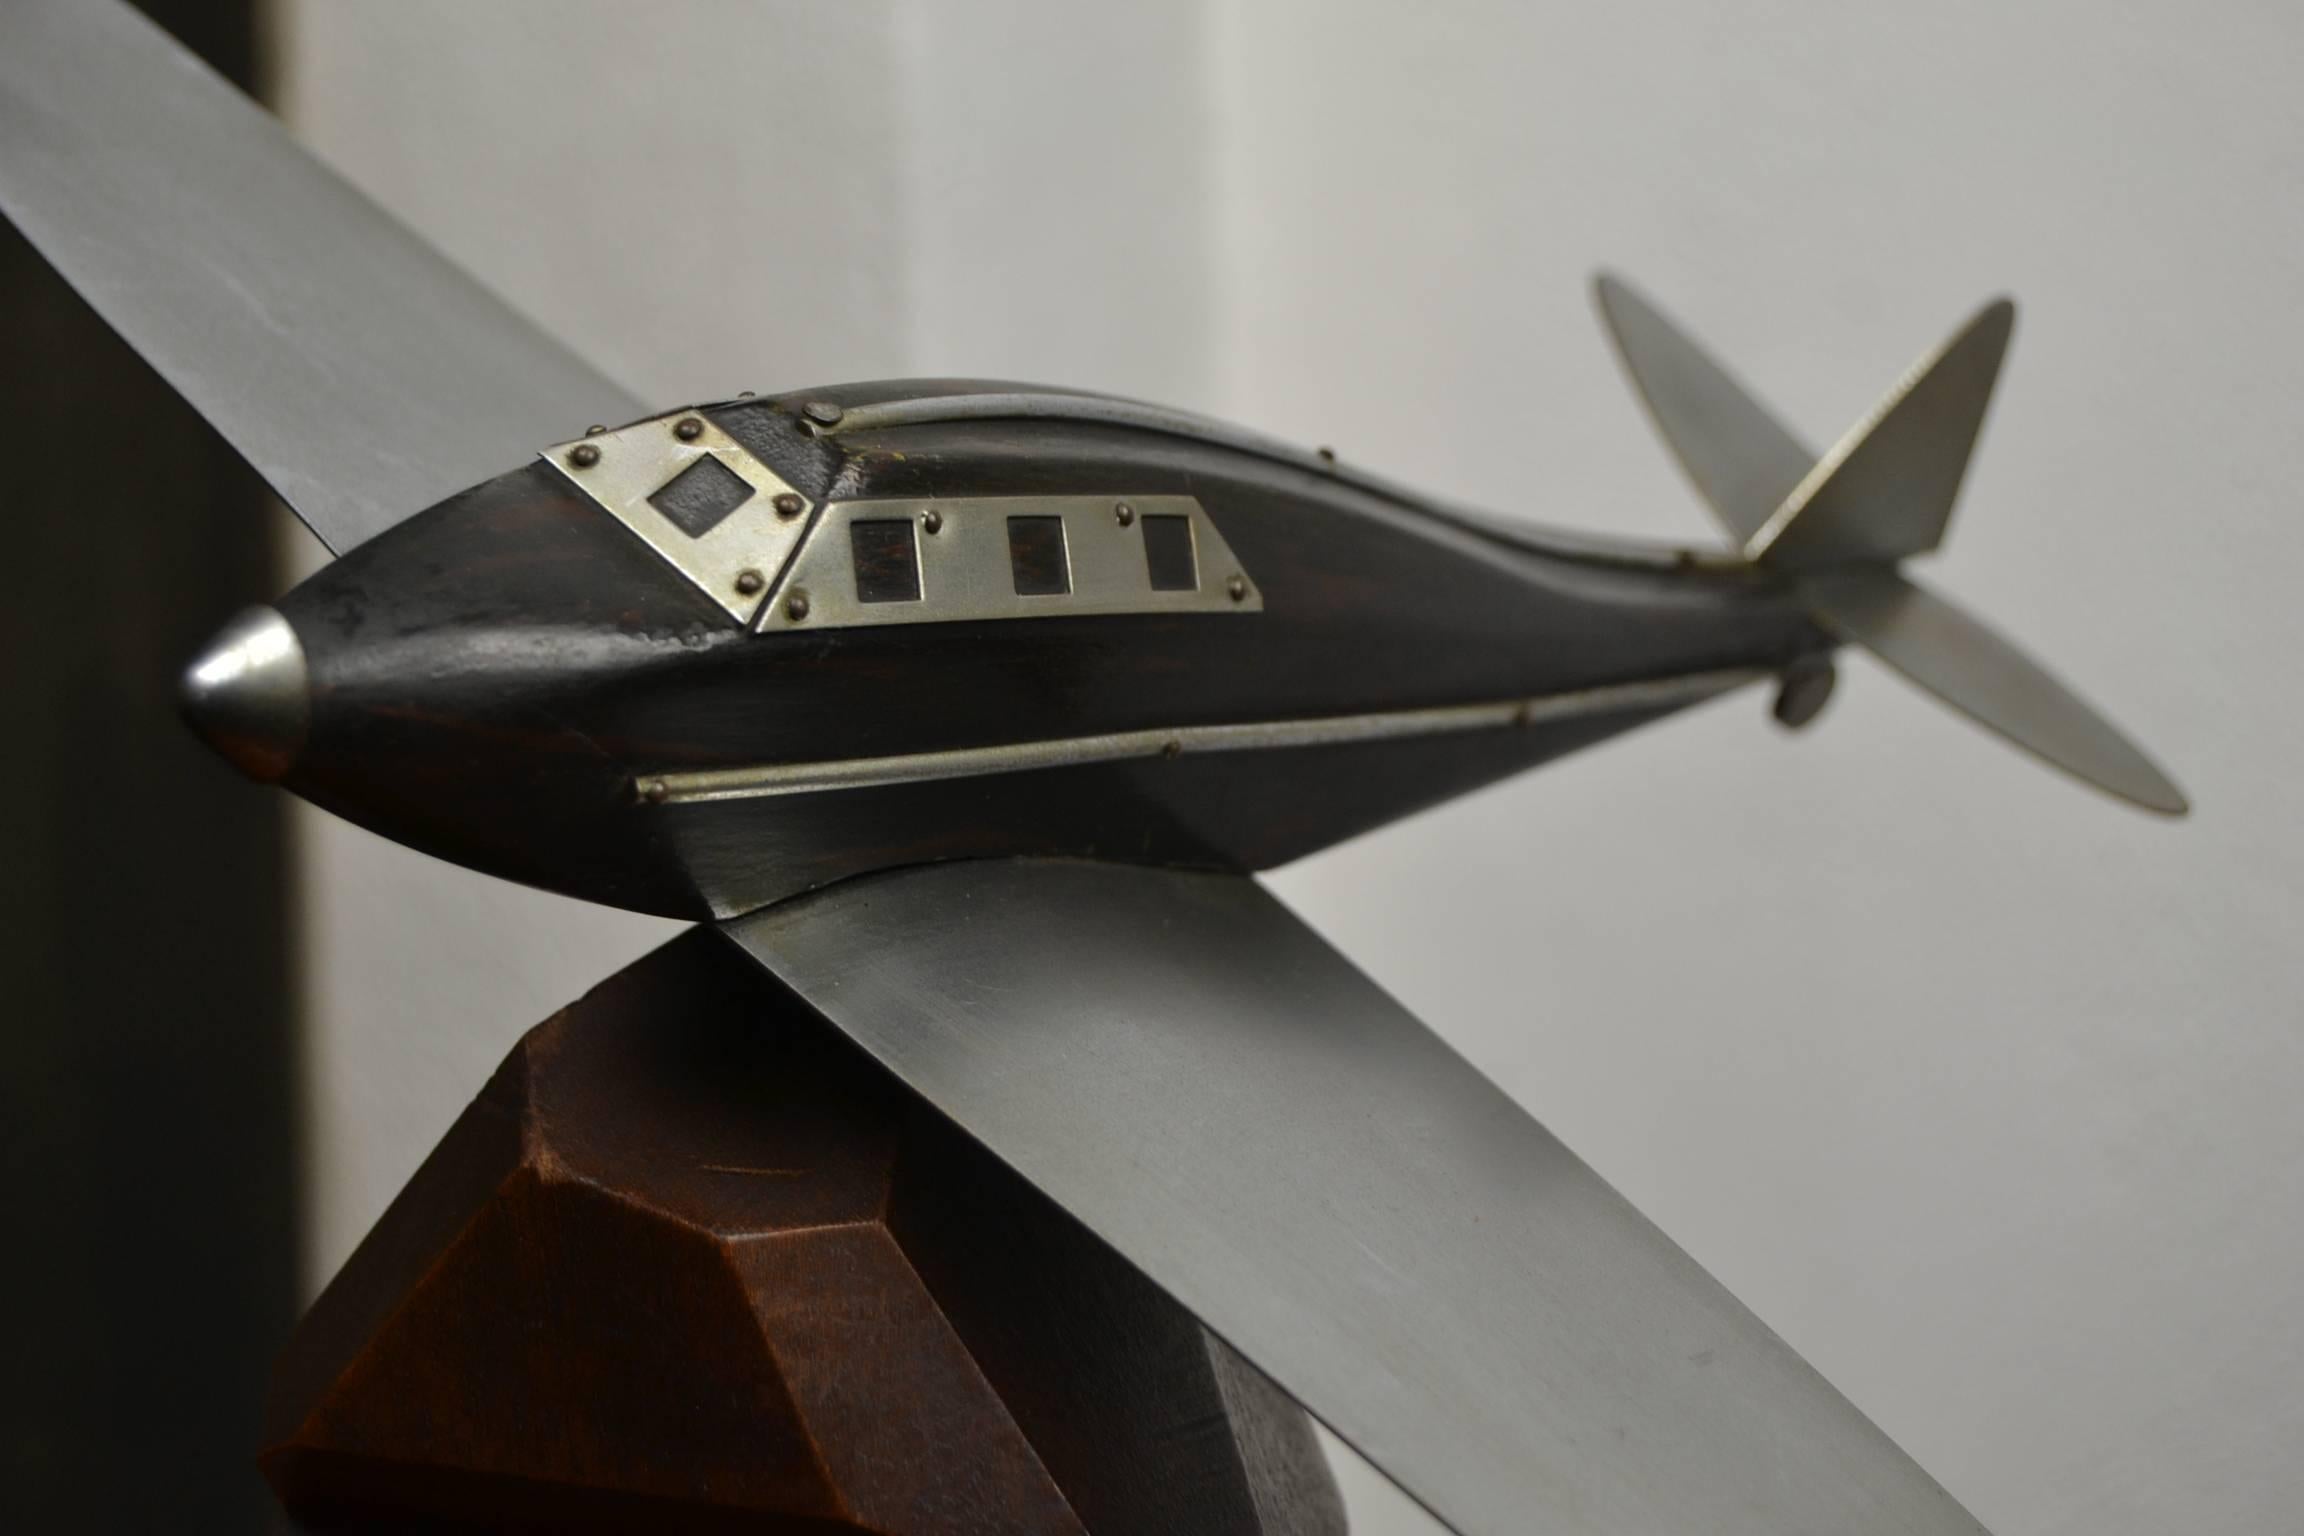 Stunning airplane model-that special desk ornament.
Wooden plane model with metal details, wings and tale. 
Art Deco period, circa 1930-1940.

  